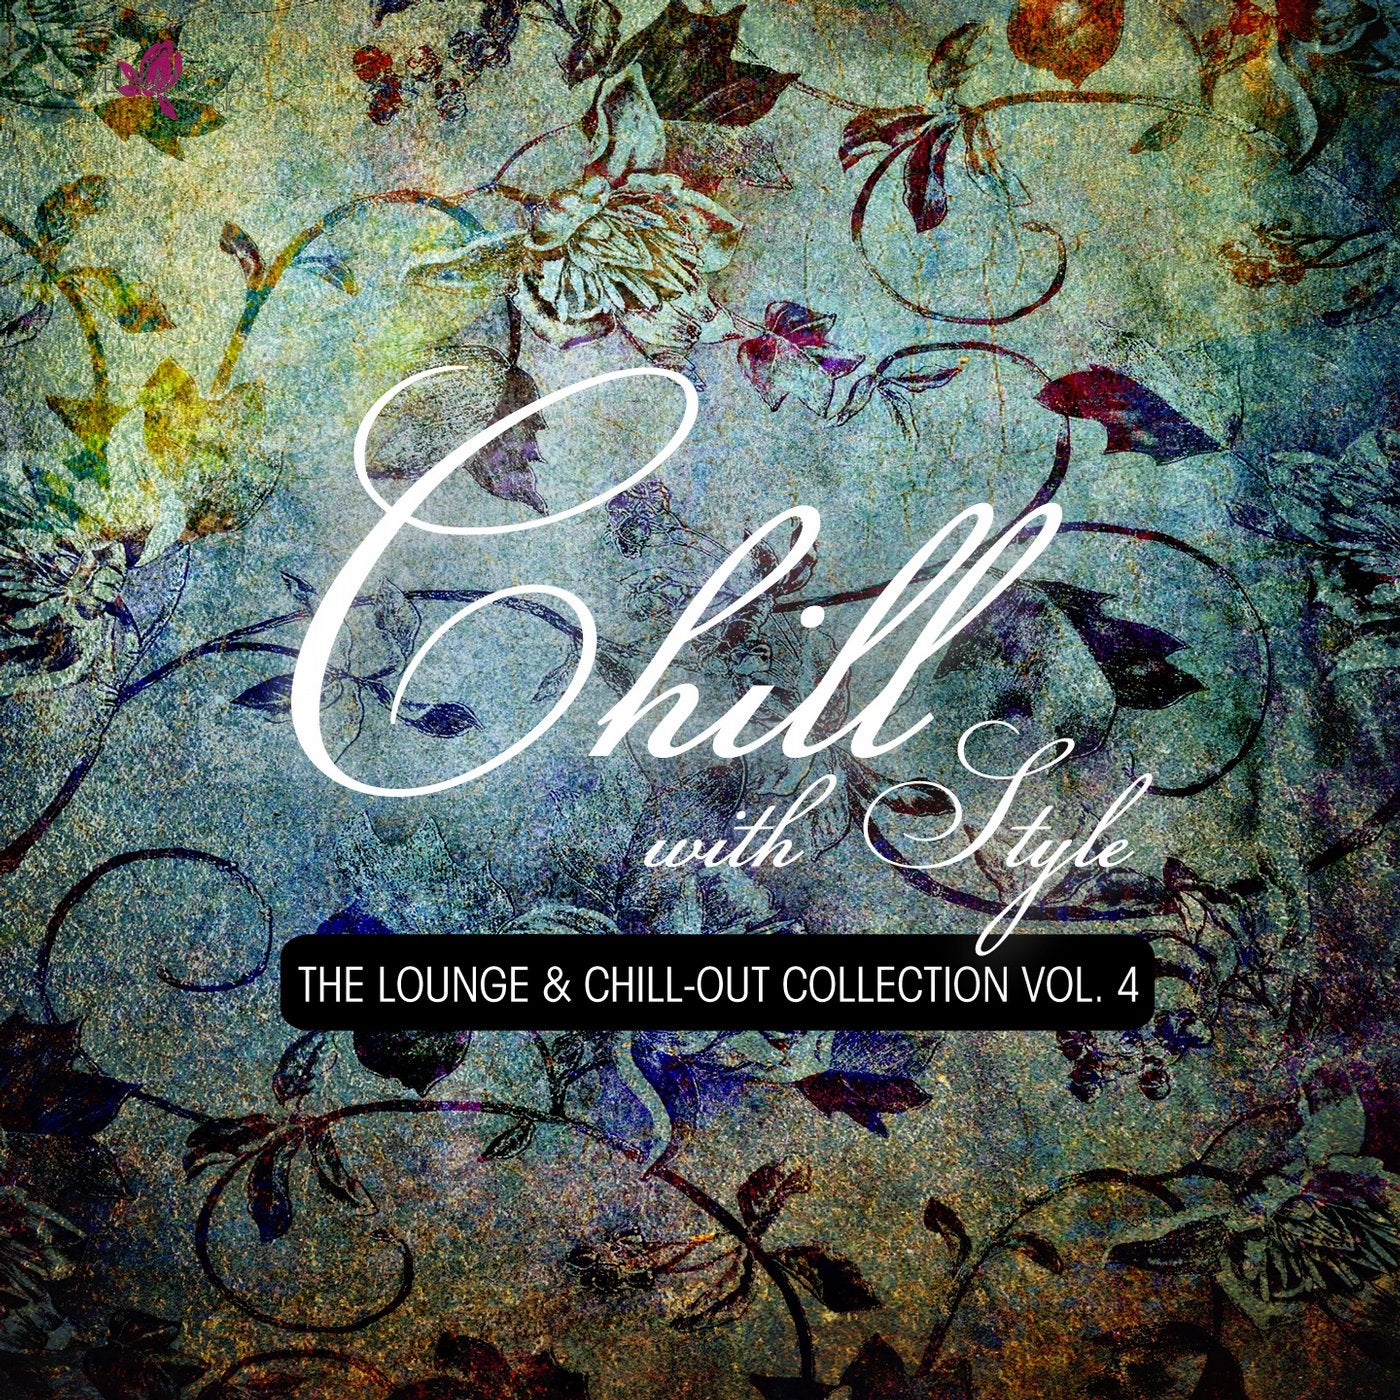 Chill With Style - The Lounge & Chill-Out Collection Vol. 4